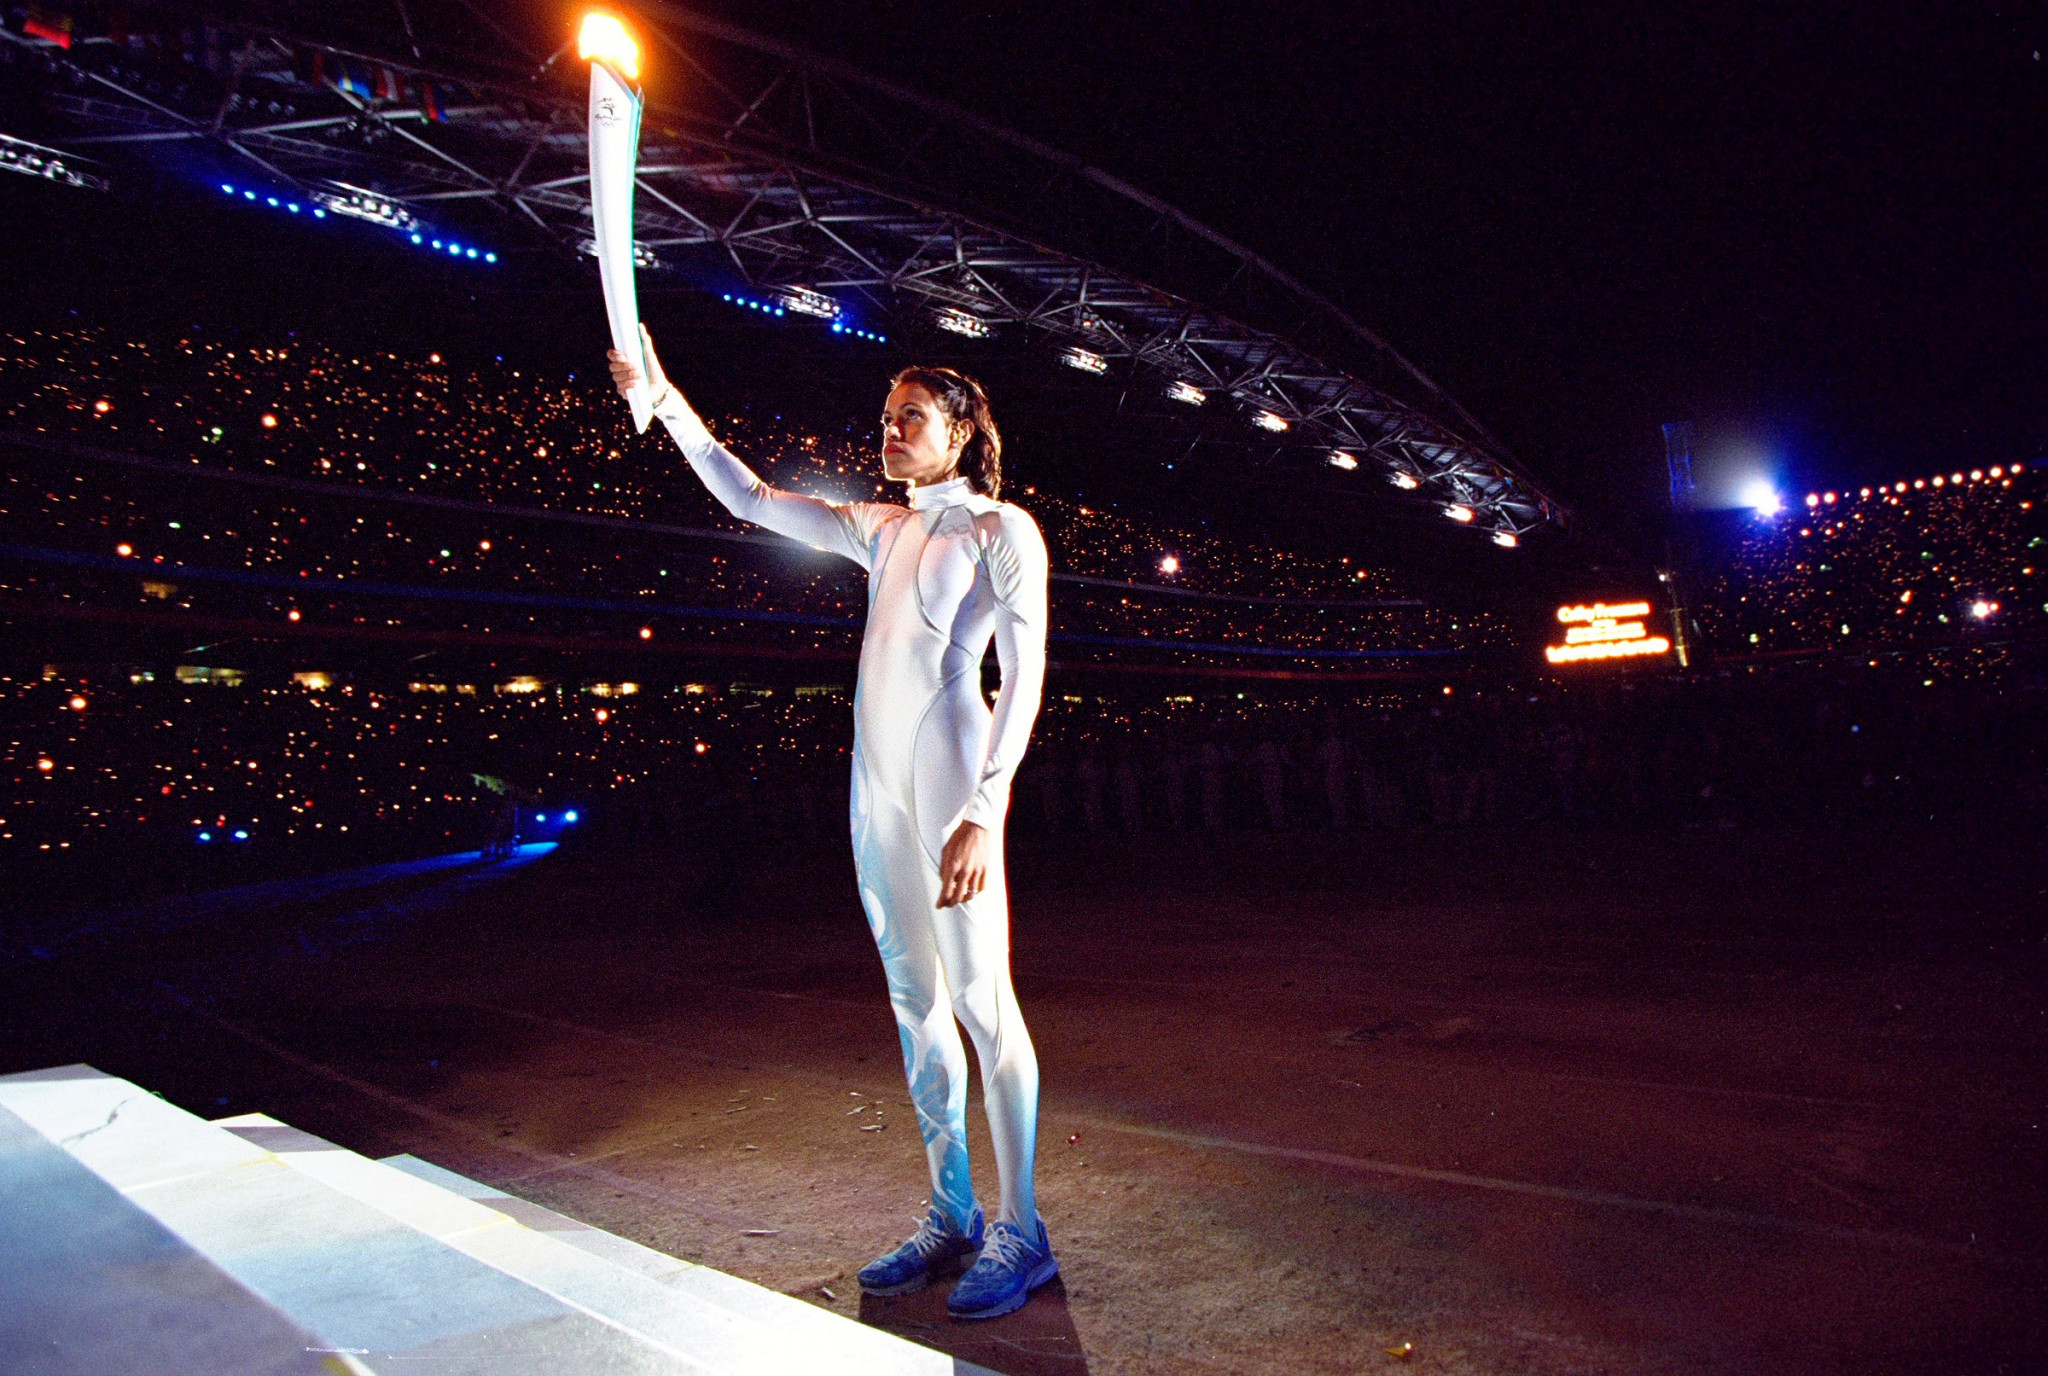 The Sydney 2000 Opening Ceremony was held on September 15 - early spring in the southern hemisphere ©Getty Images